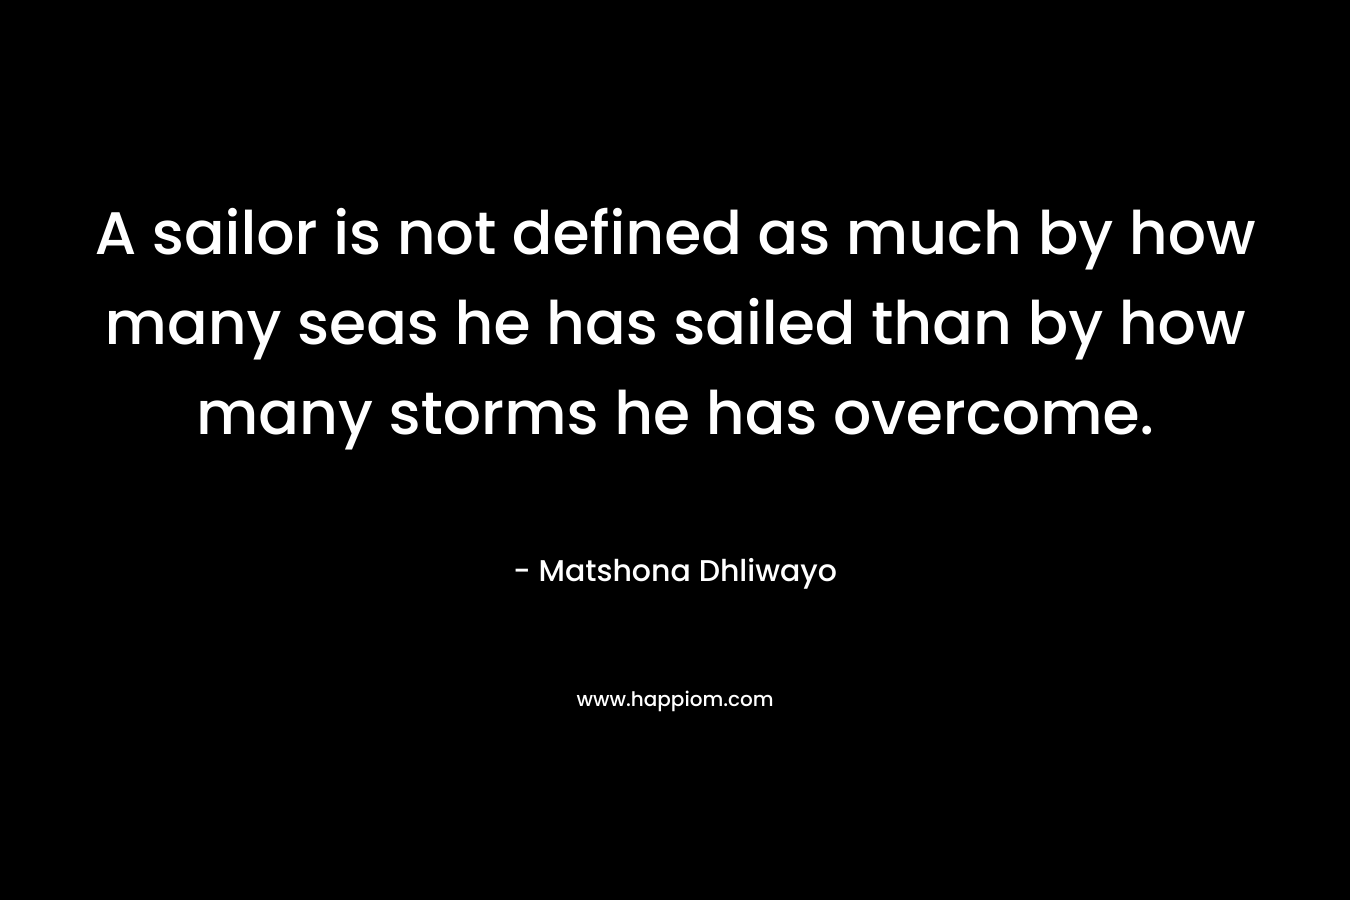 A sailor is not defined as much by how many seas he has sailed than by how many storms he has overcome.